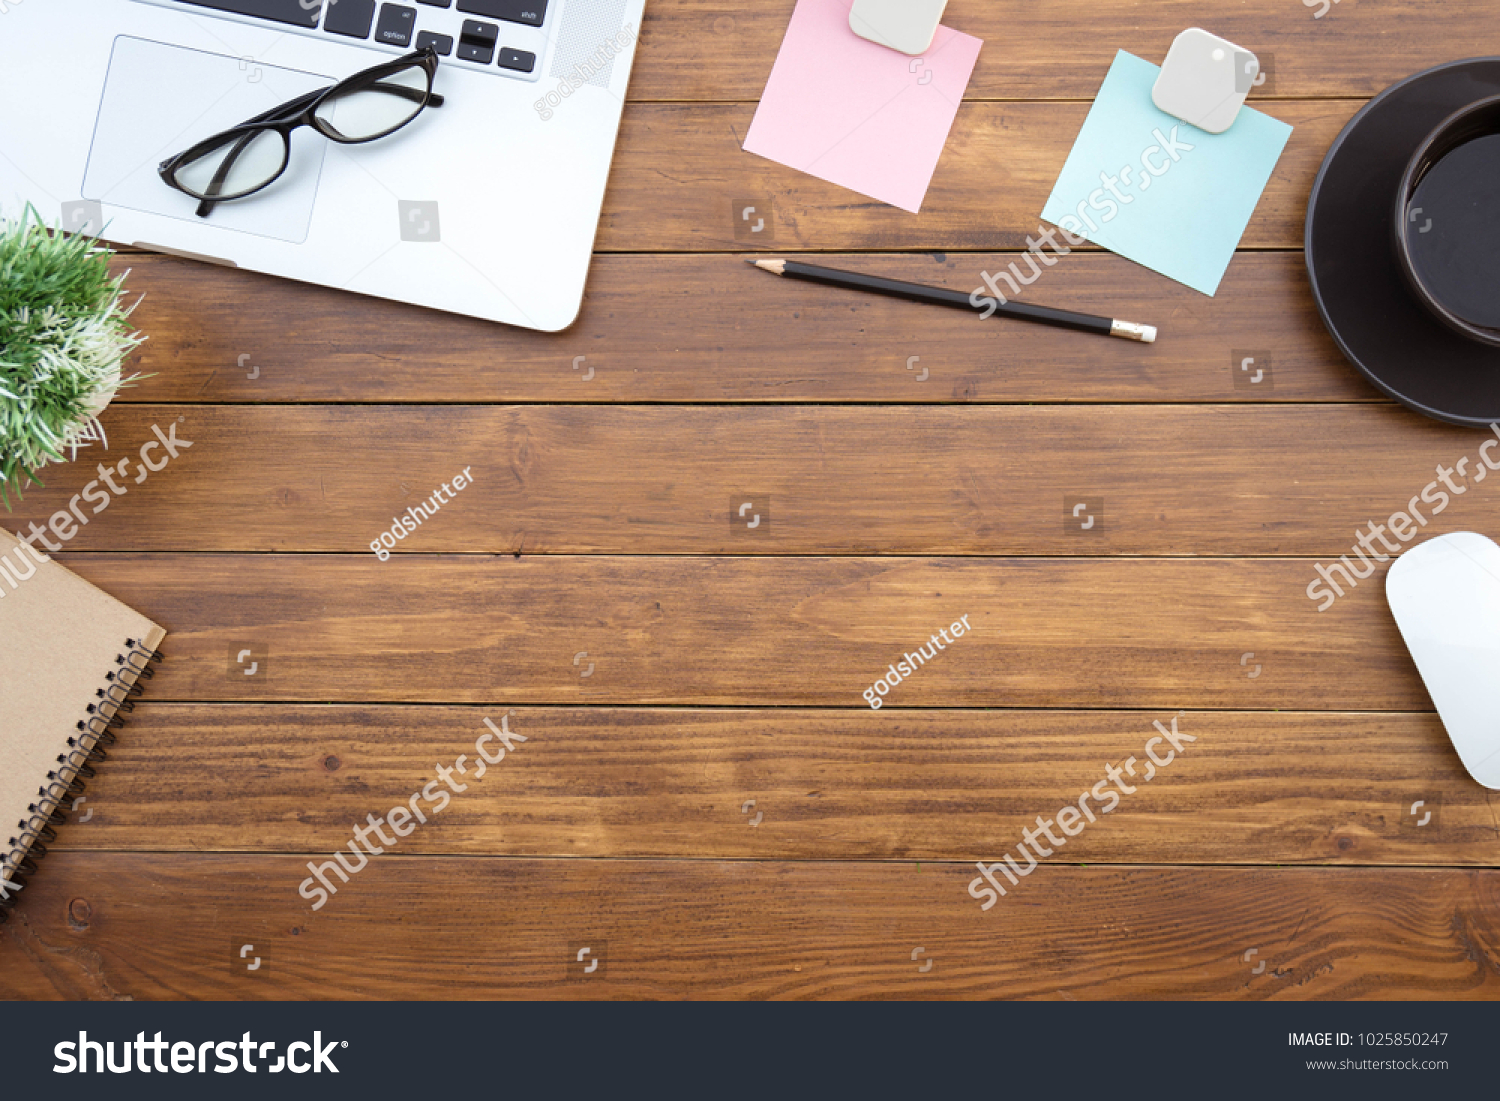 Flat Lay Top View Desk Work Stock Photo Edit Now 1025850247